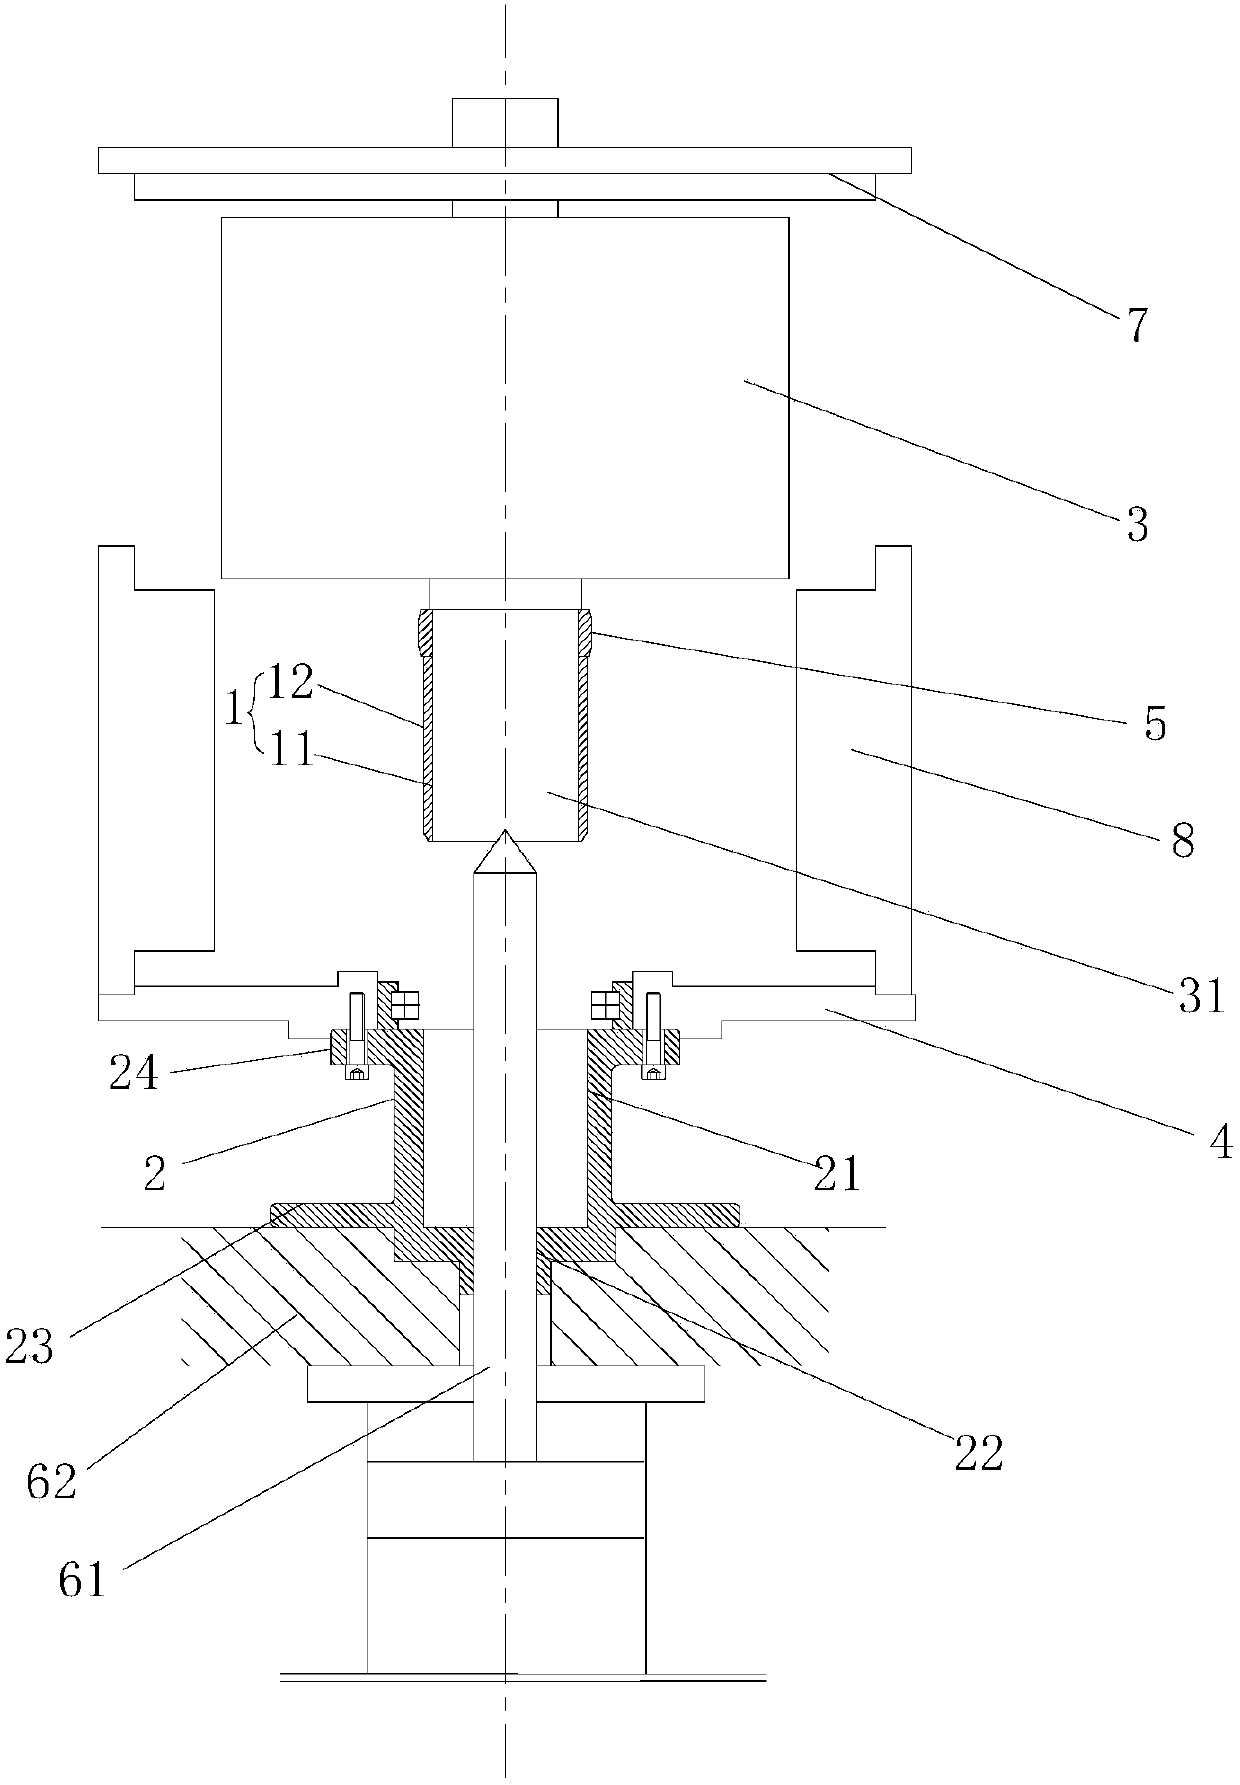 Stator, rotor and bearing one-time assembled precision guiding device for permanent magnetism motor